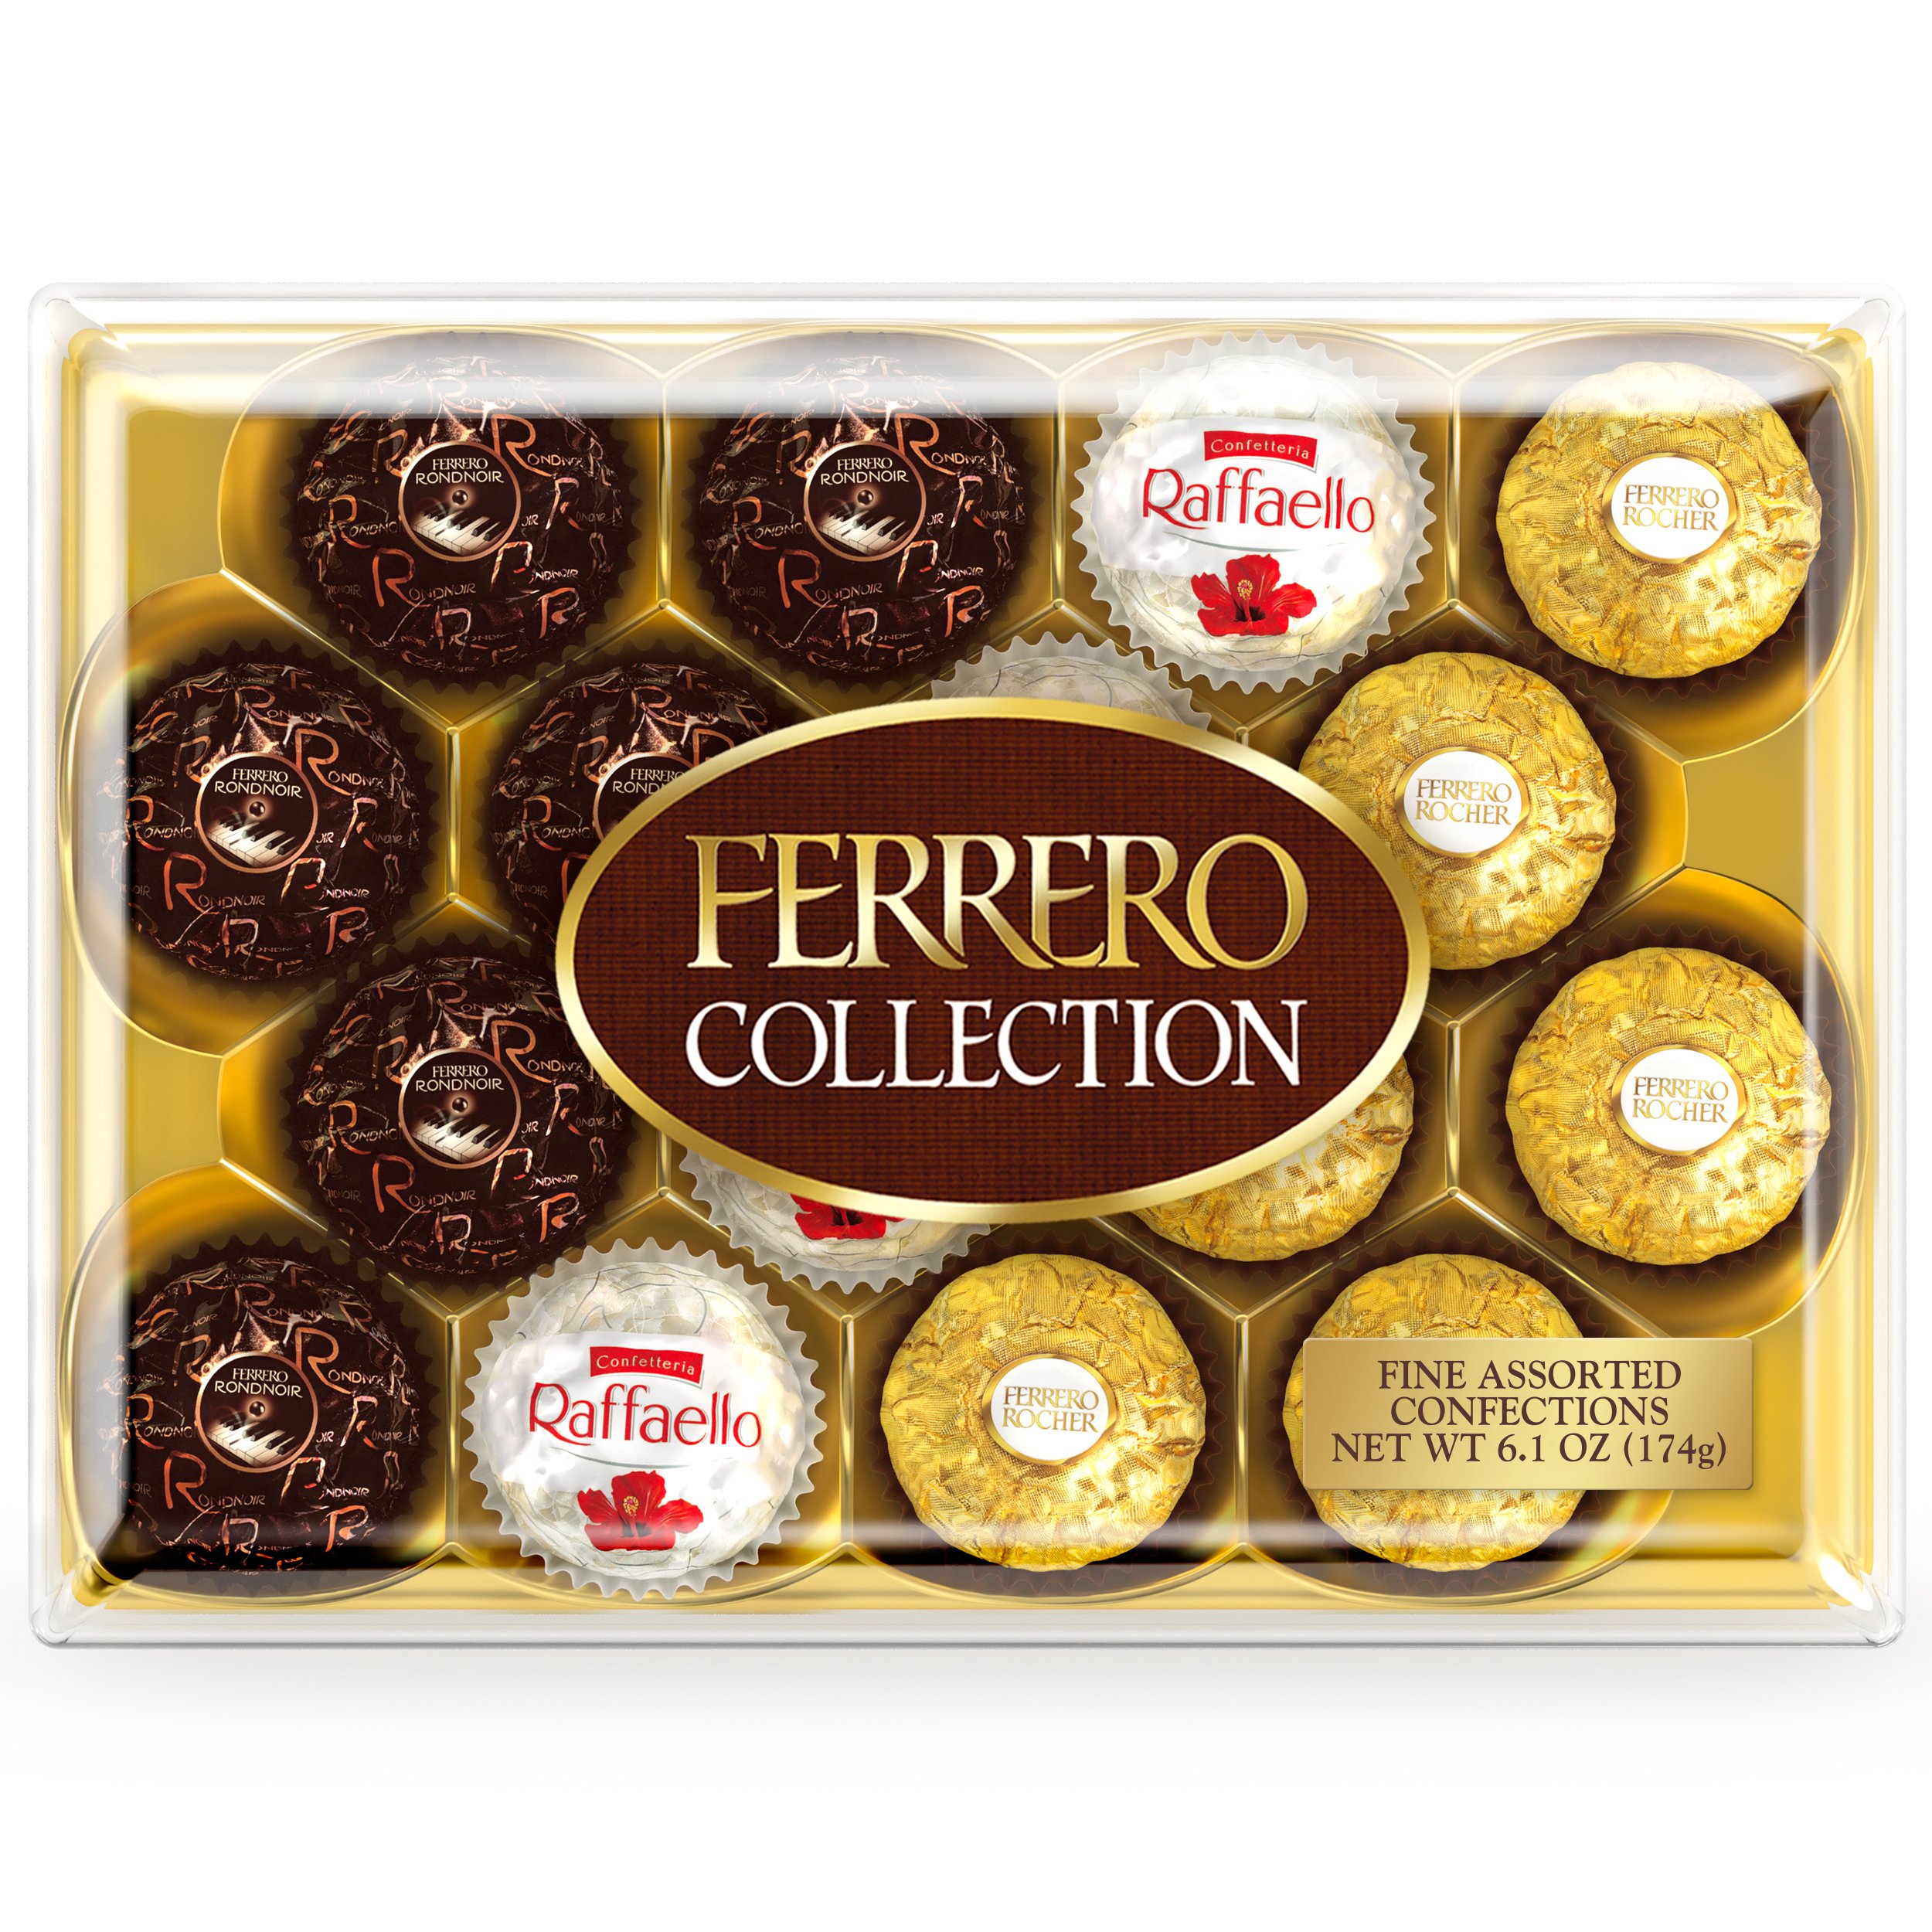 Ferrero Collection Assorted Box at - Shop Truffles Gift Candy H-E-B